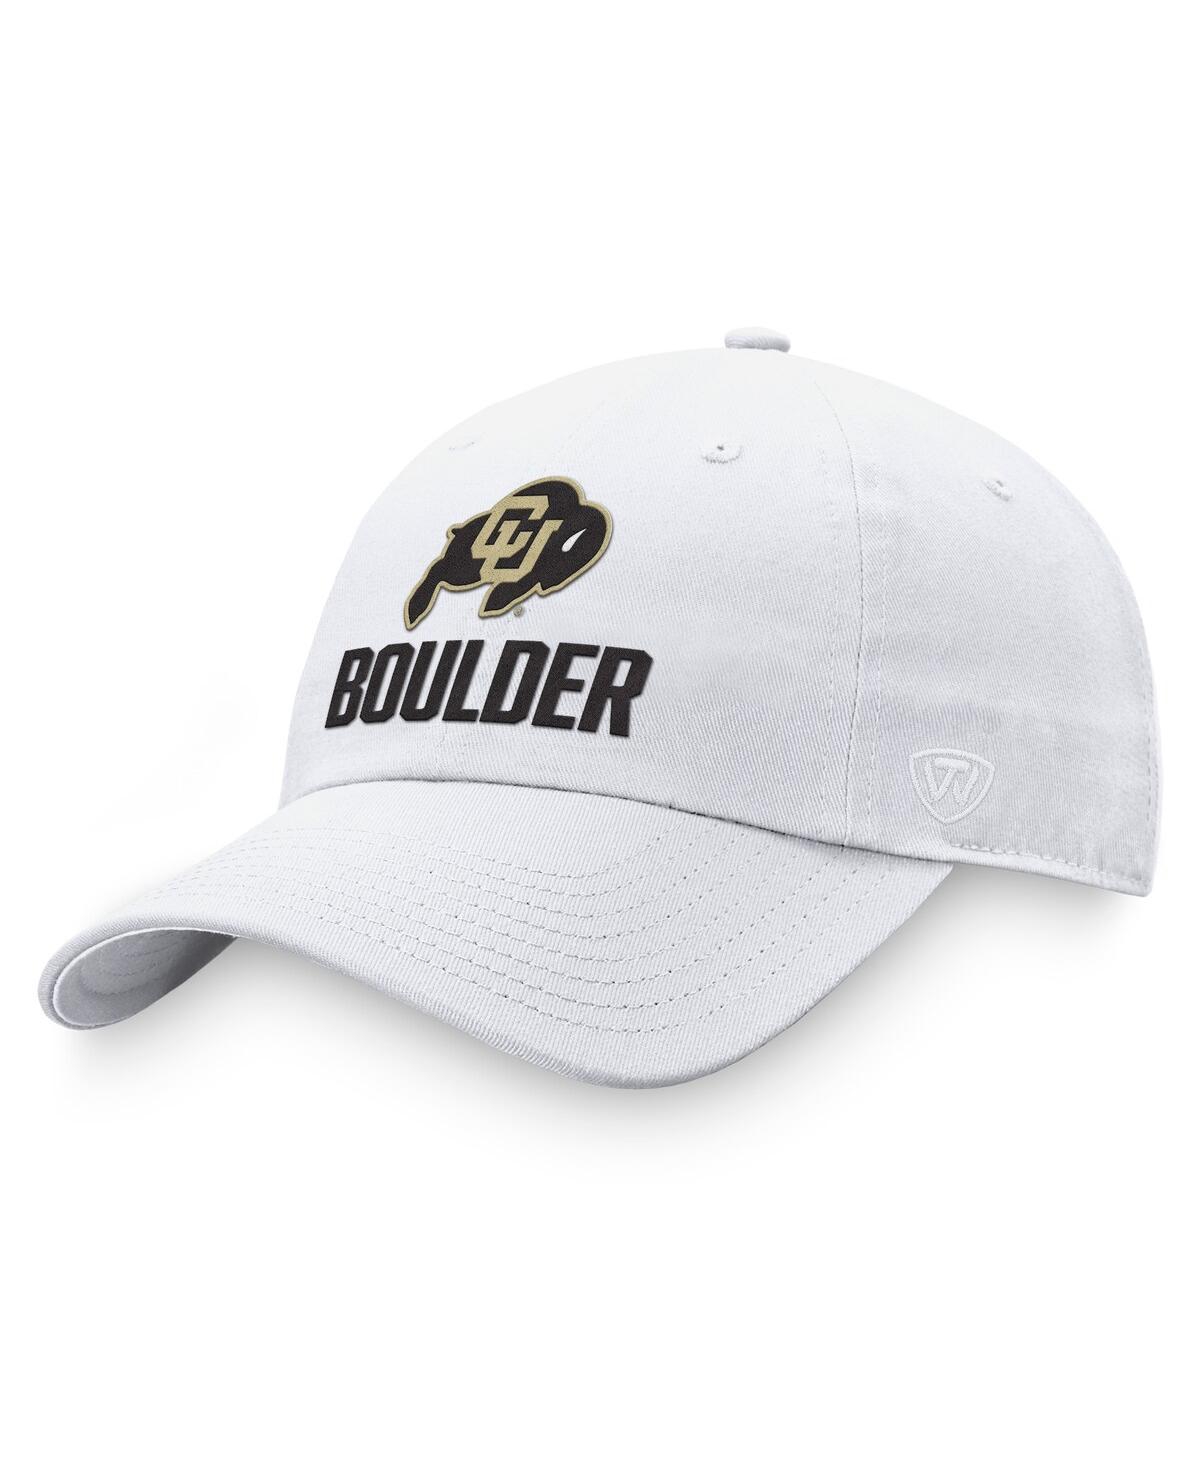 Men's Top of the World White Colorado Buffaloes Adjustable Hat - White